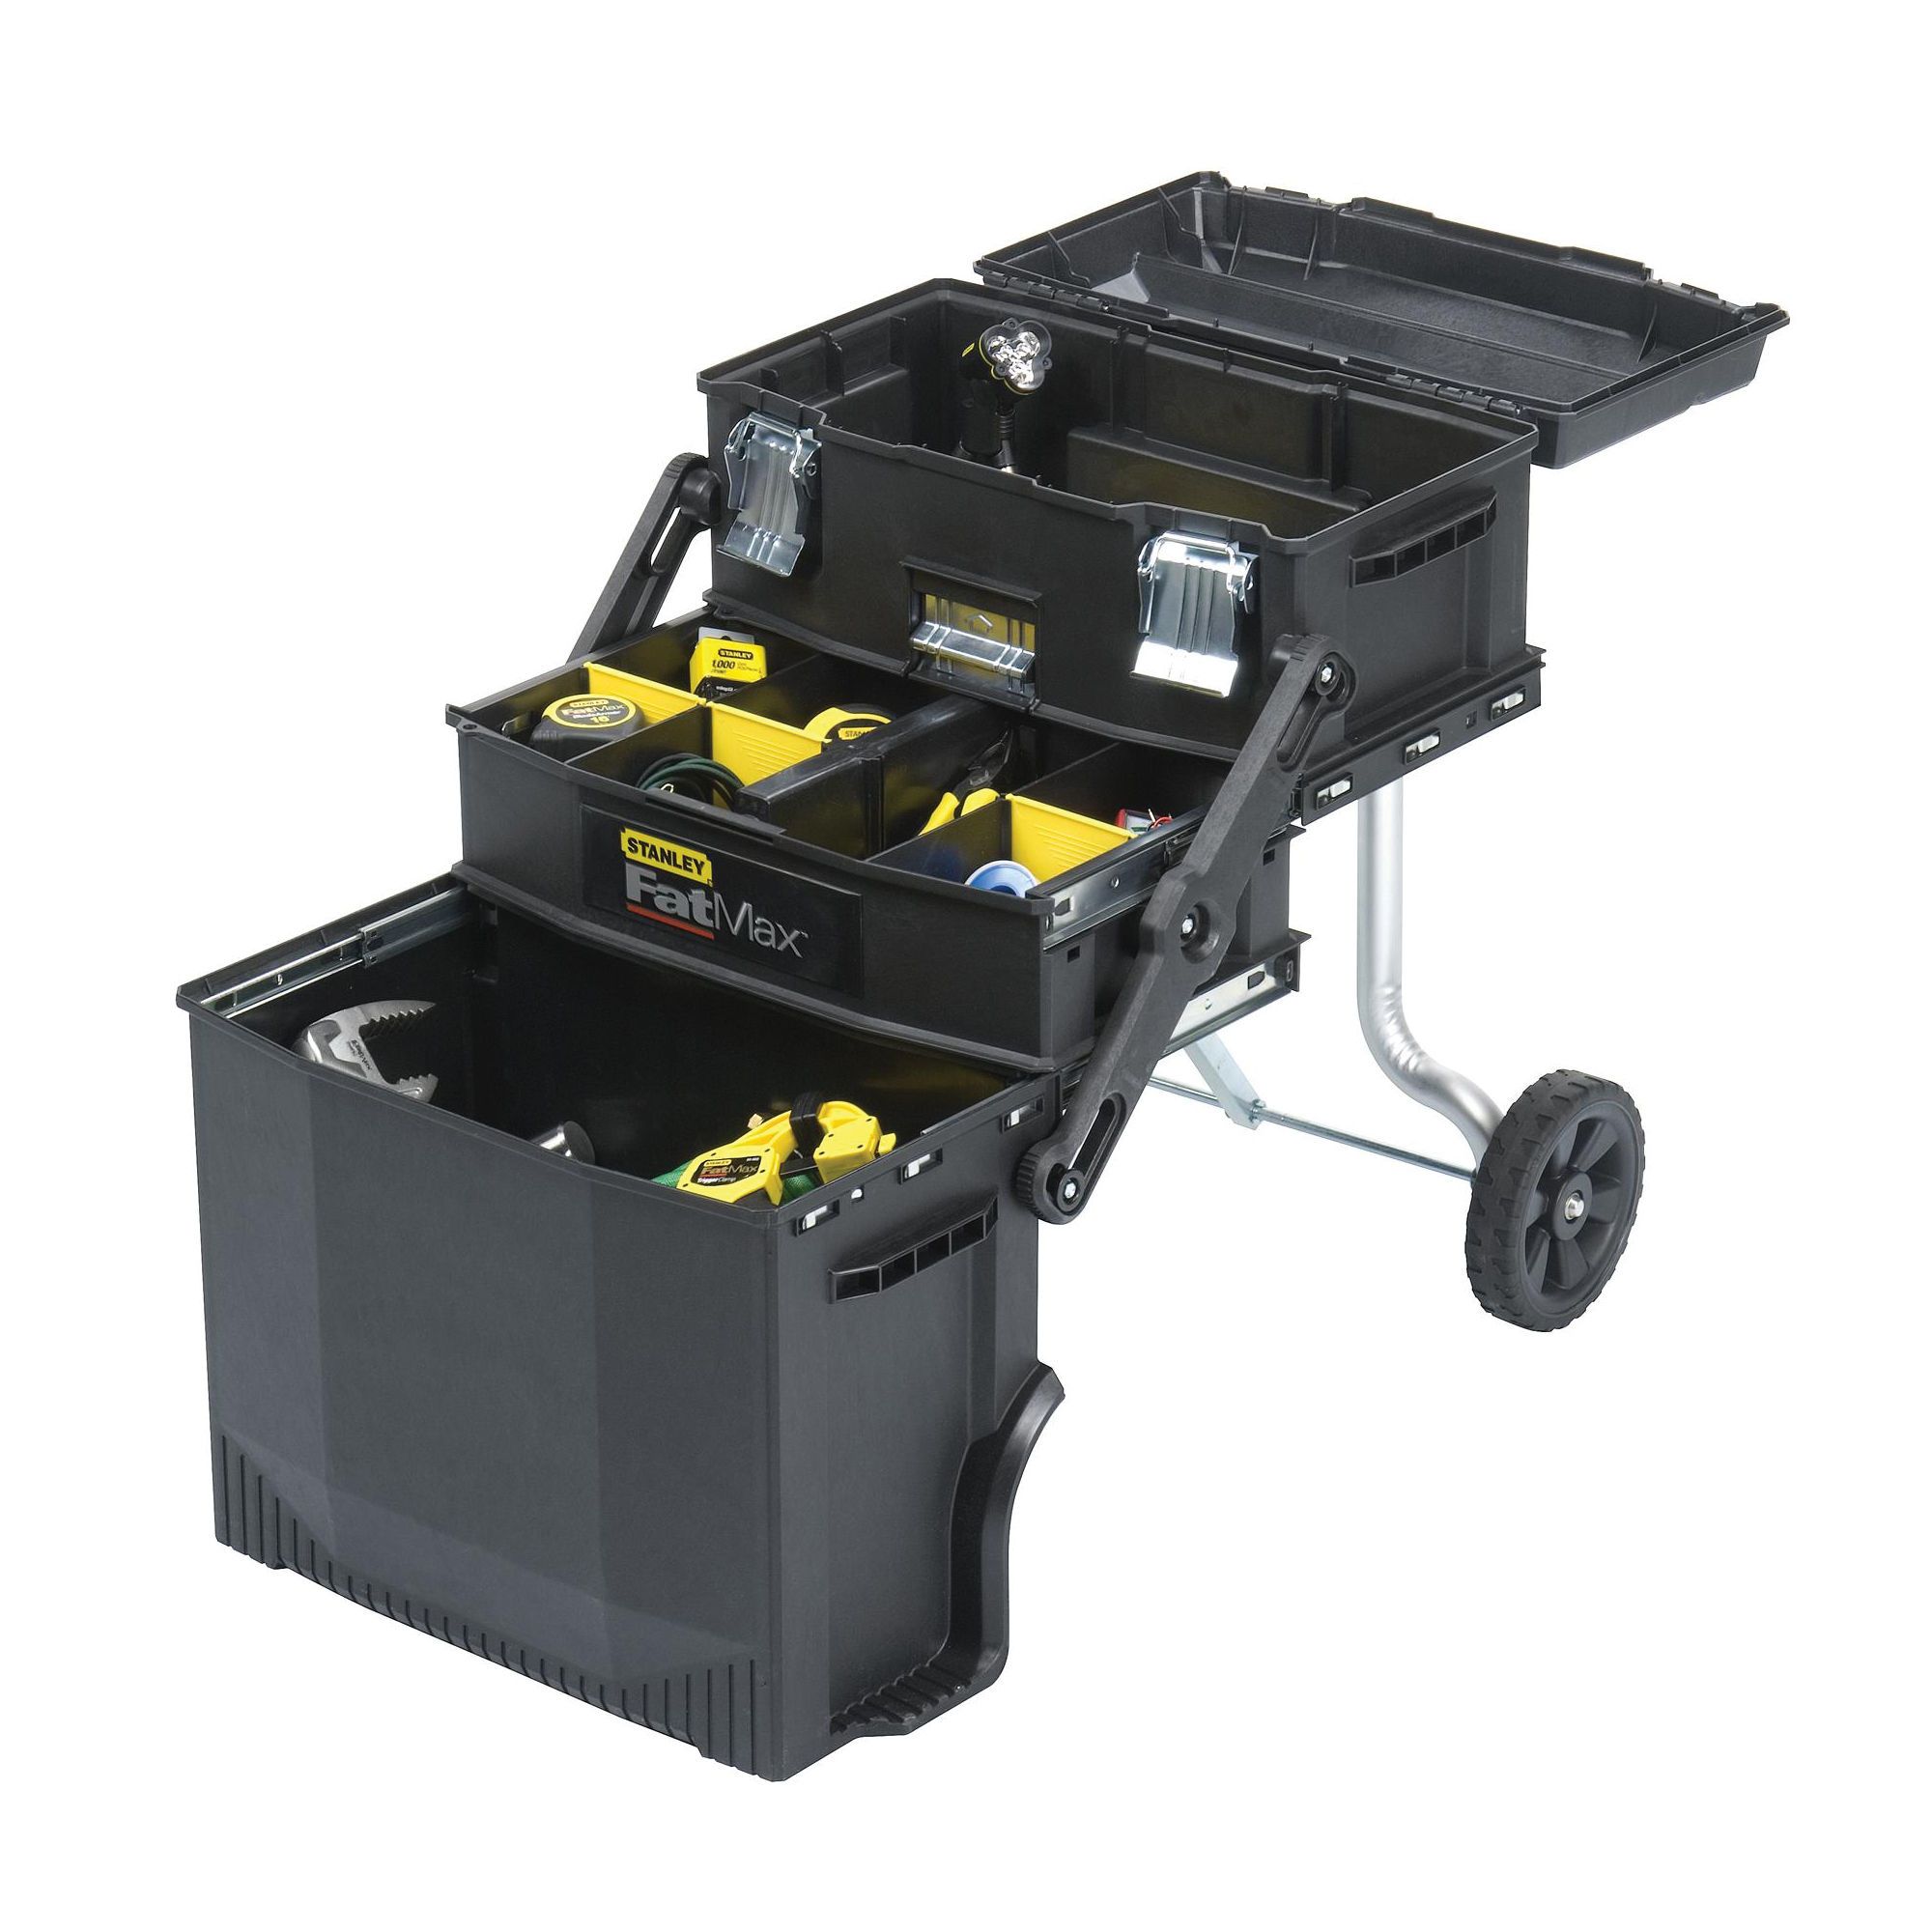 Rolling Tool Box - Stanley Fatmax - 4 in 1 - Black from STANLEY